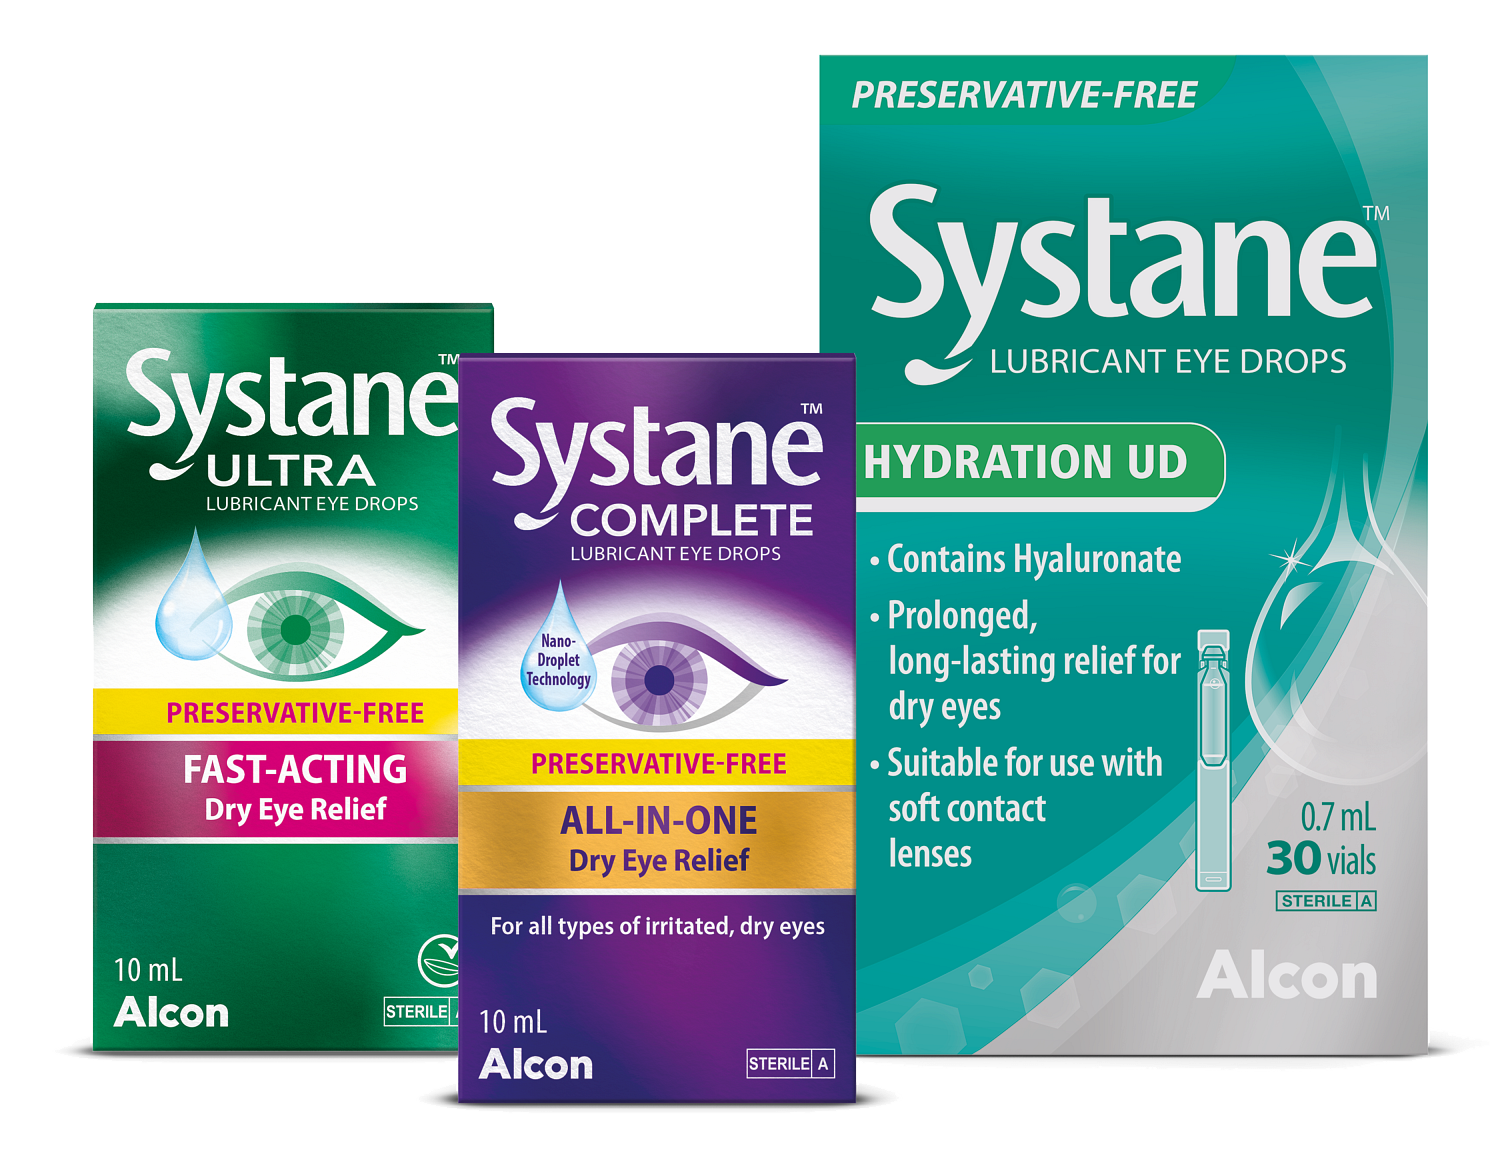 Systane Preservative Free Range Pack Shots, from left to right: Systane Ultra Preservative Free lubricant eye drops, Systane Complete Preservative Free lubricant eye drops and Systane Hydration Unit Dose lubricant eye drops pack shots.